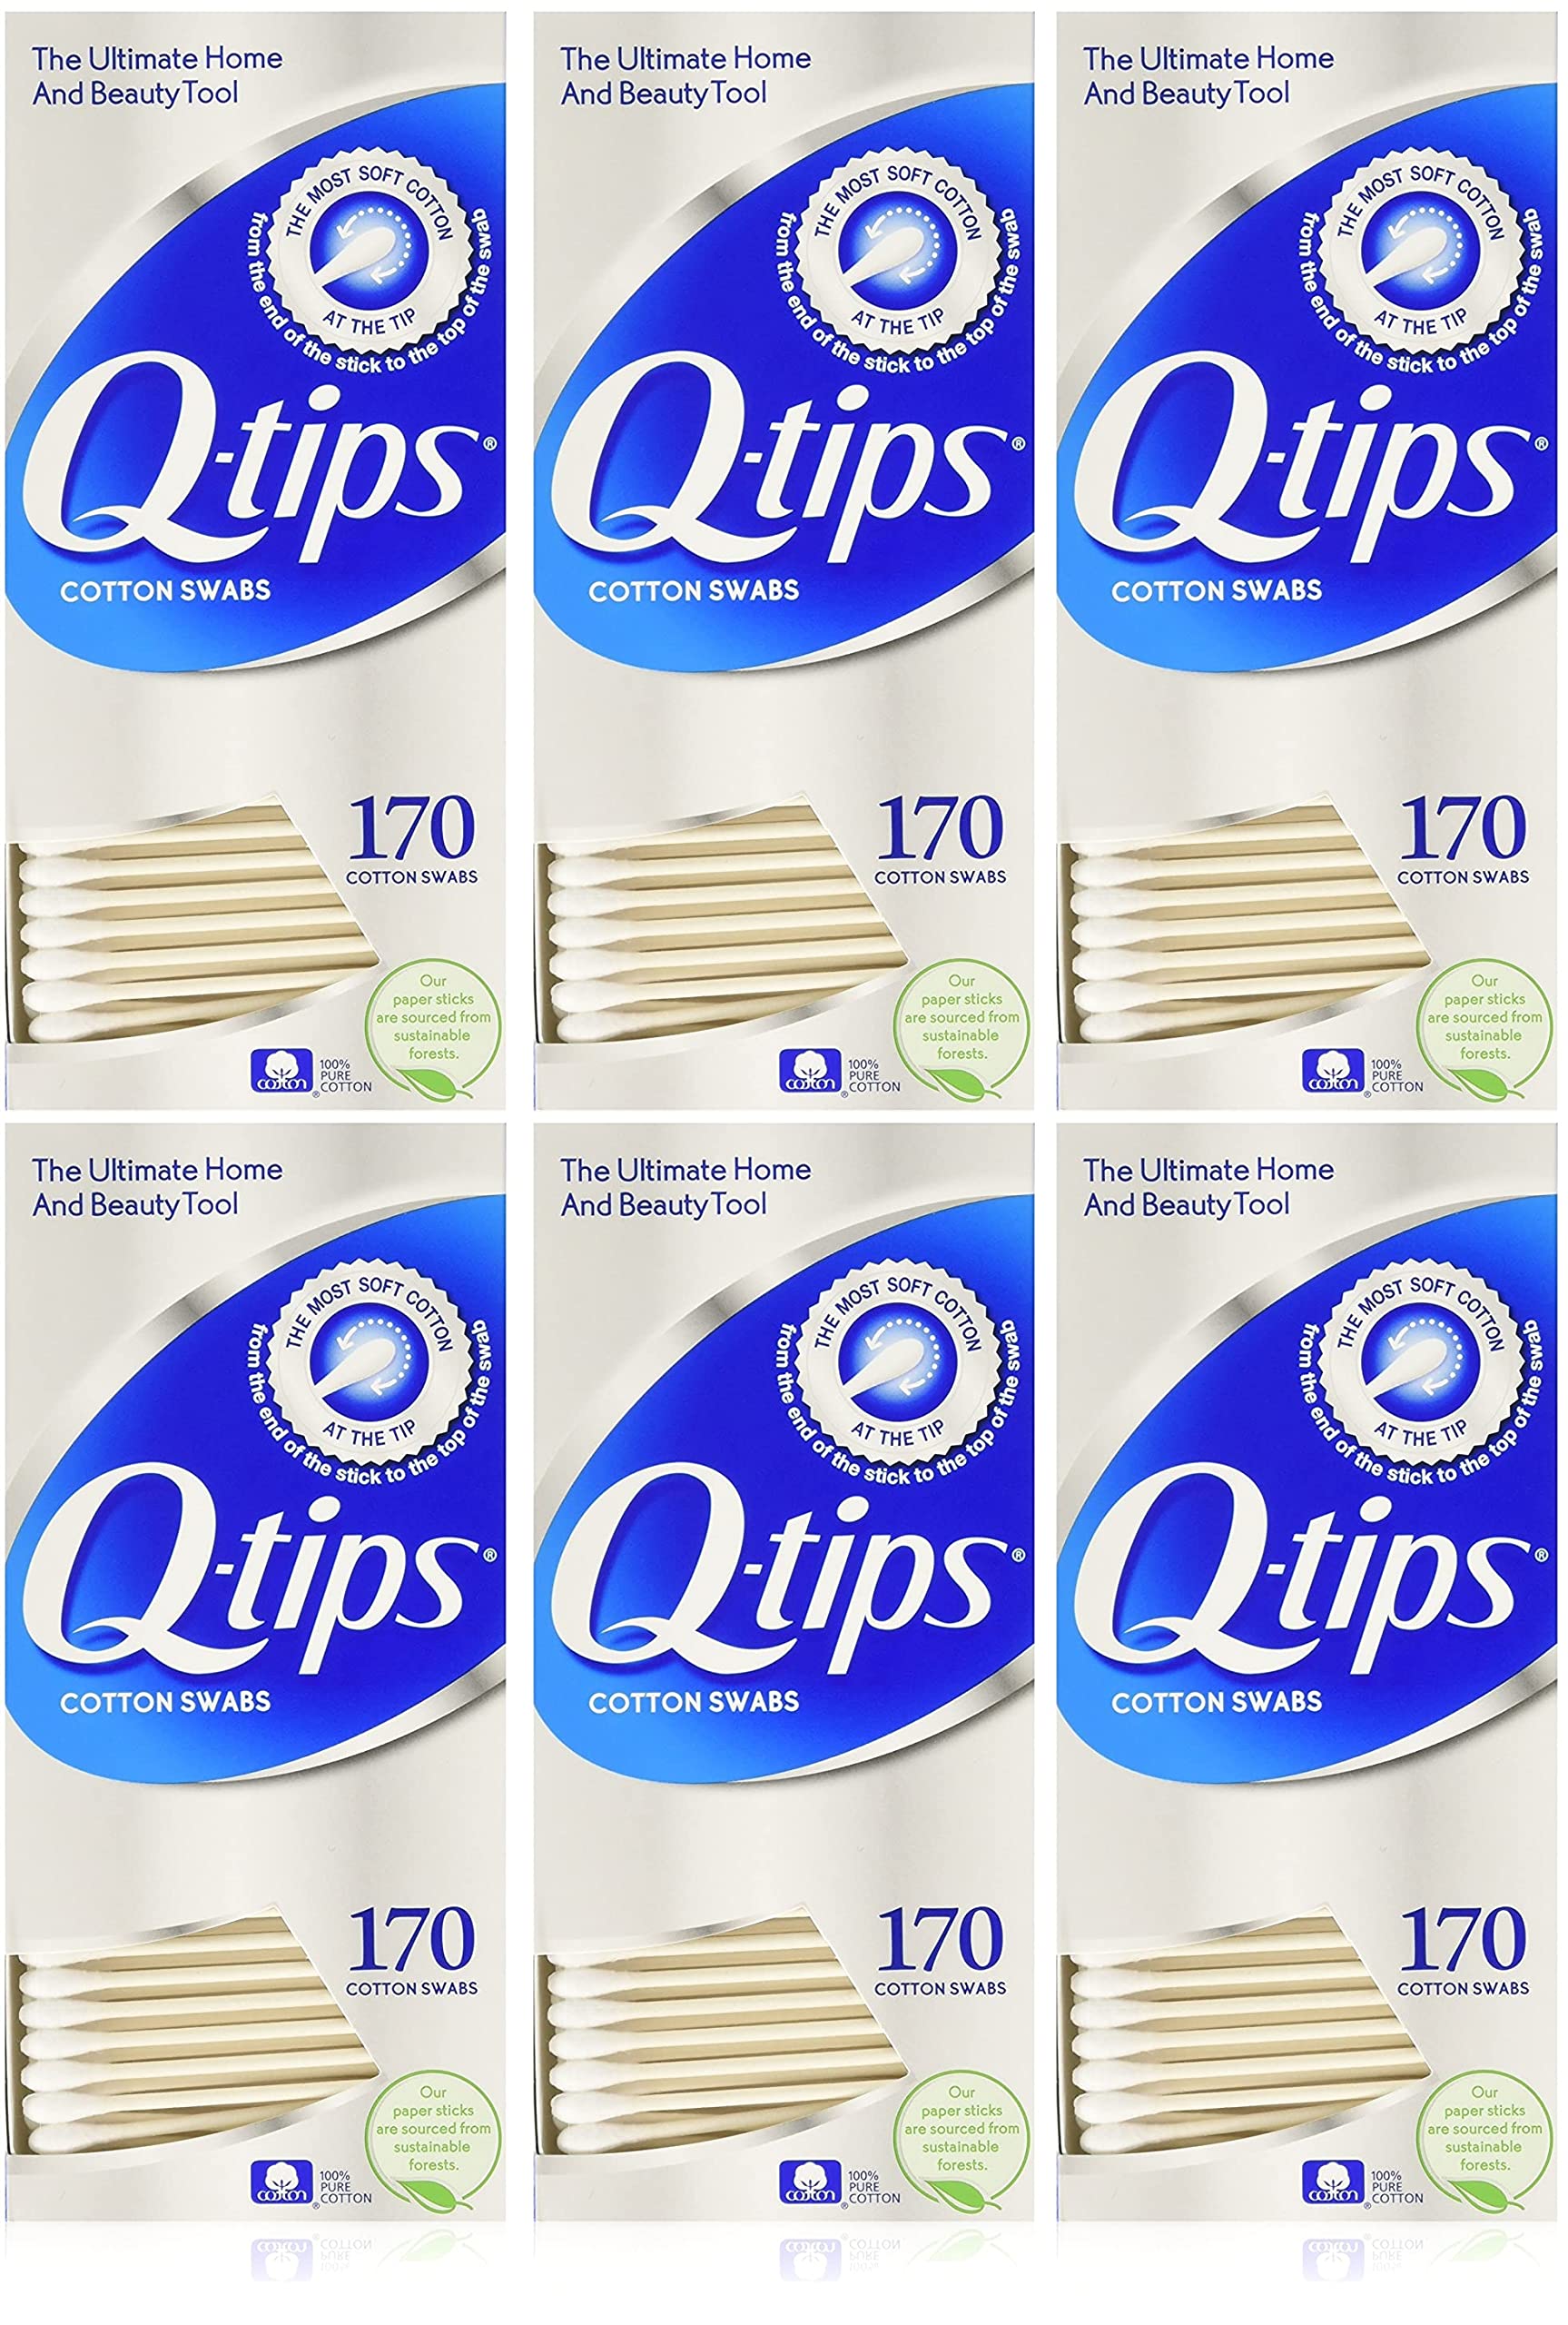 Q-Tips Cotton Swabs, 170 Count, 6-Pack